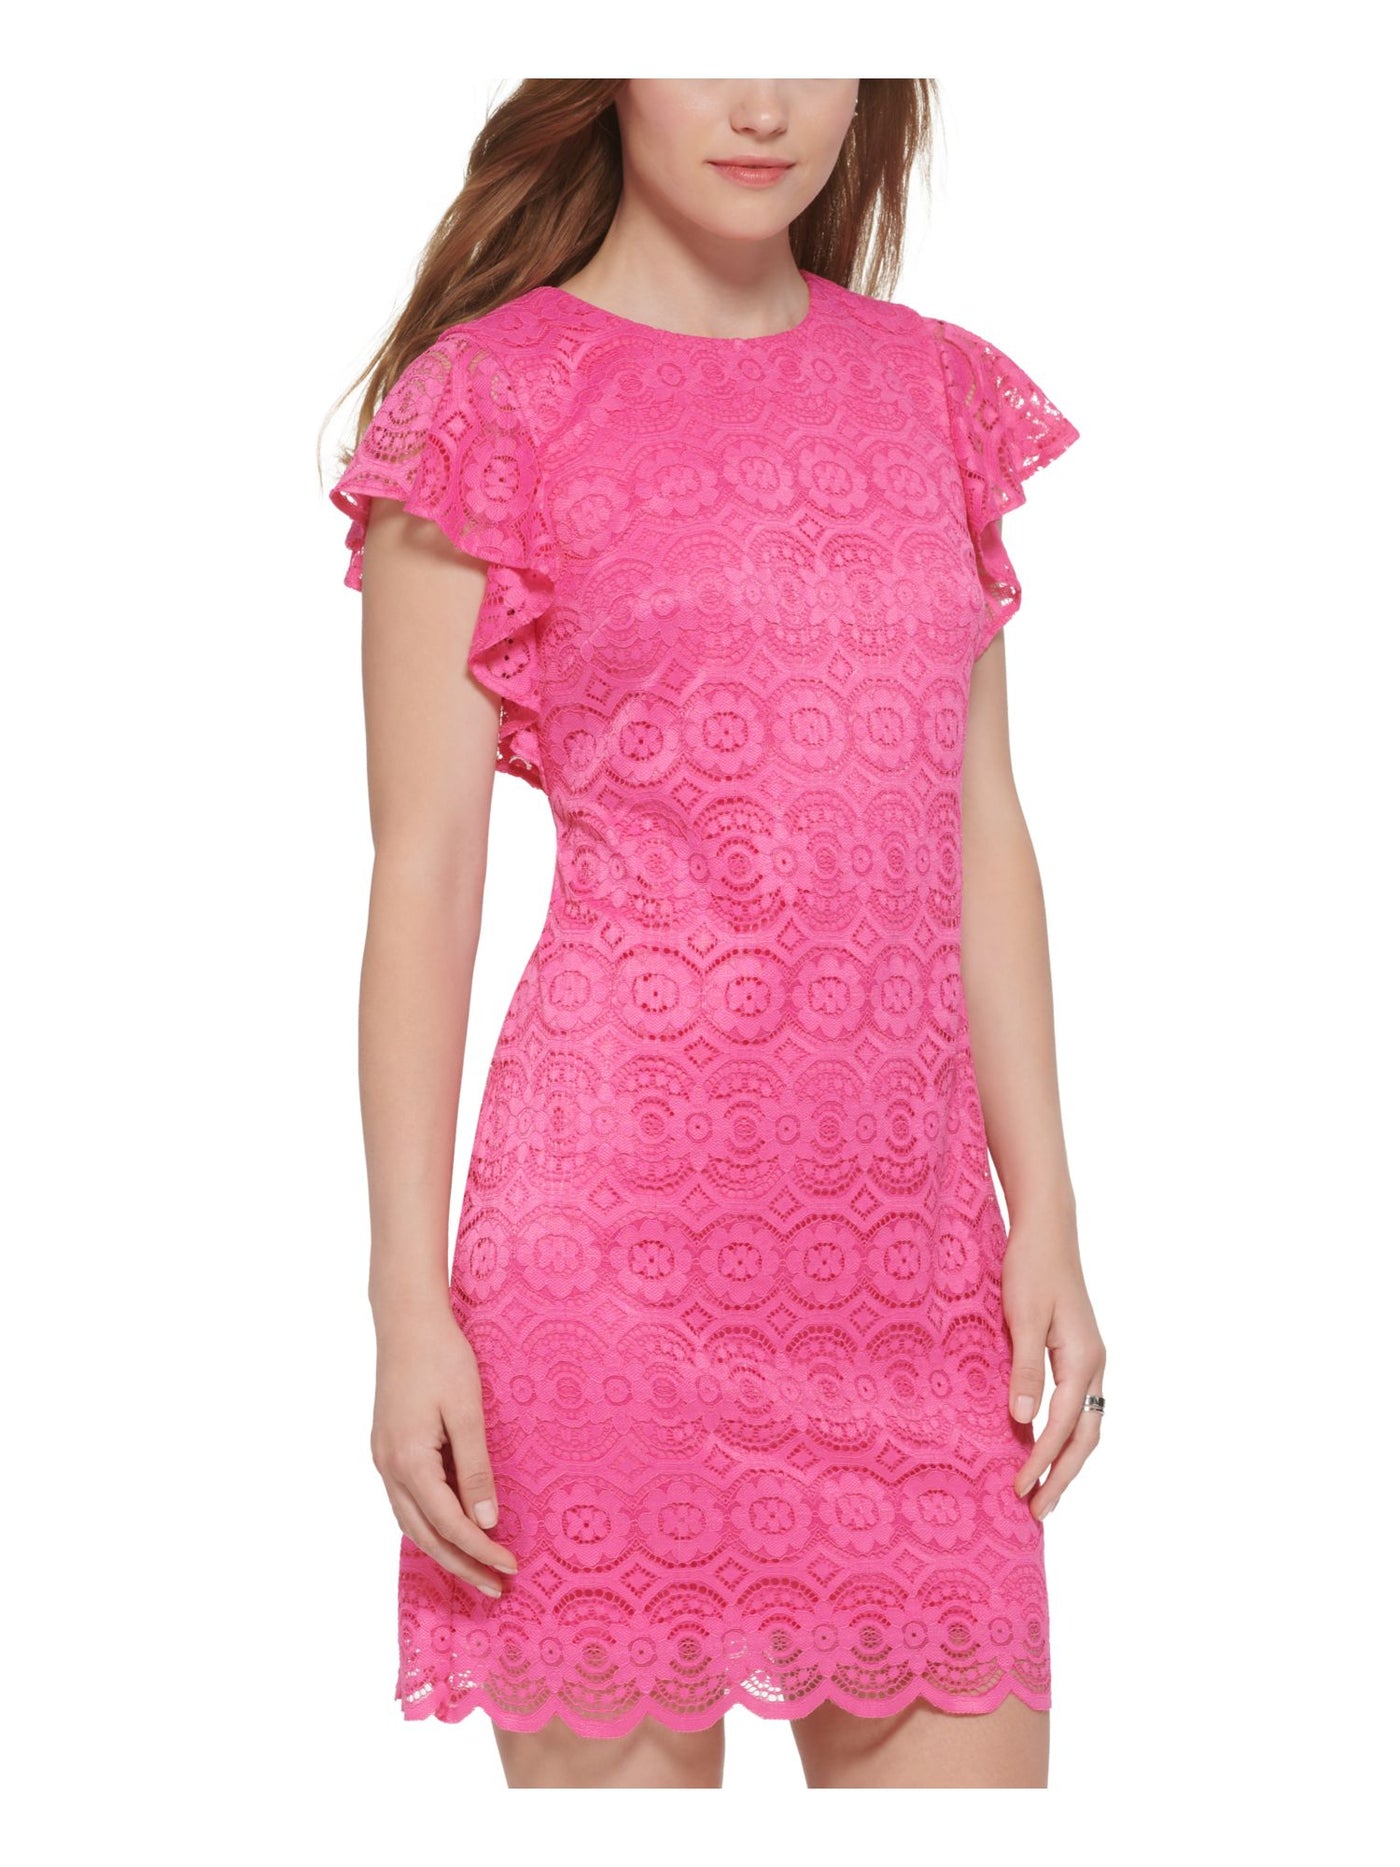 JESSICA HOWARD PETITES Womens Pink Zippered Scalloped Lace Keyhole Back Sheer Floral Flutter Sleeve Round Neck Above The Knee Sheath Dress Petites 6P